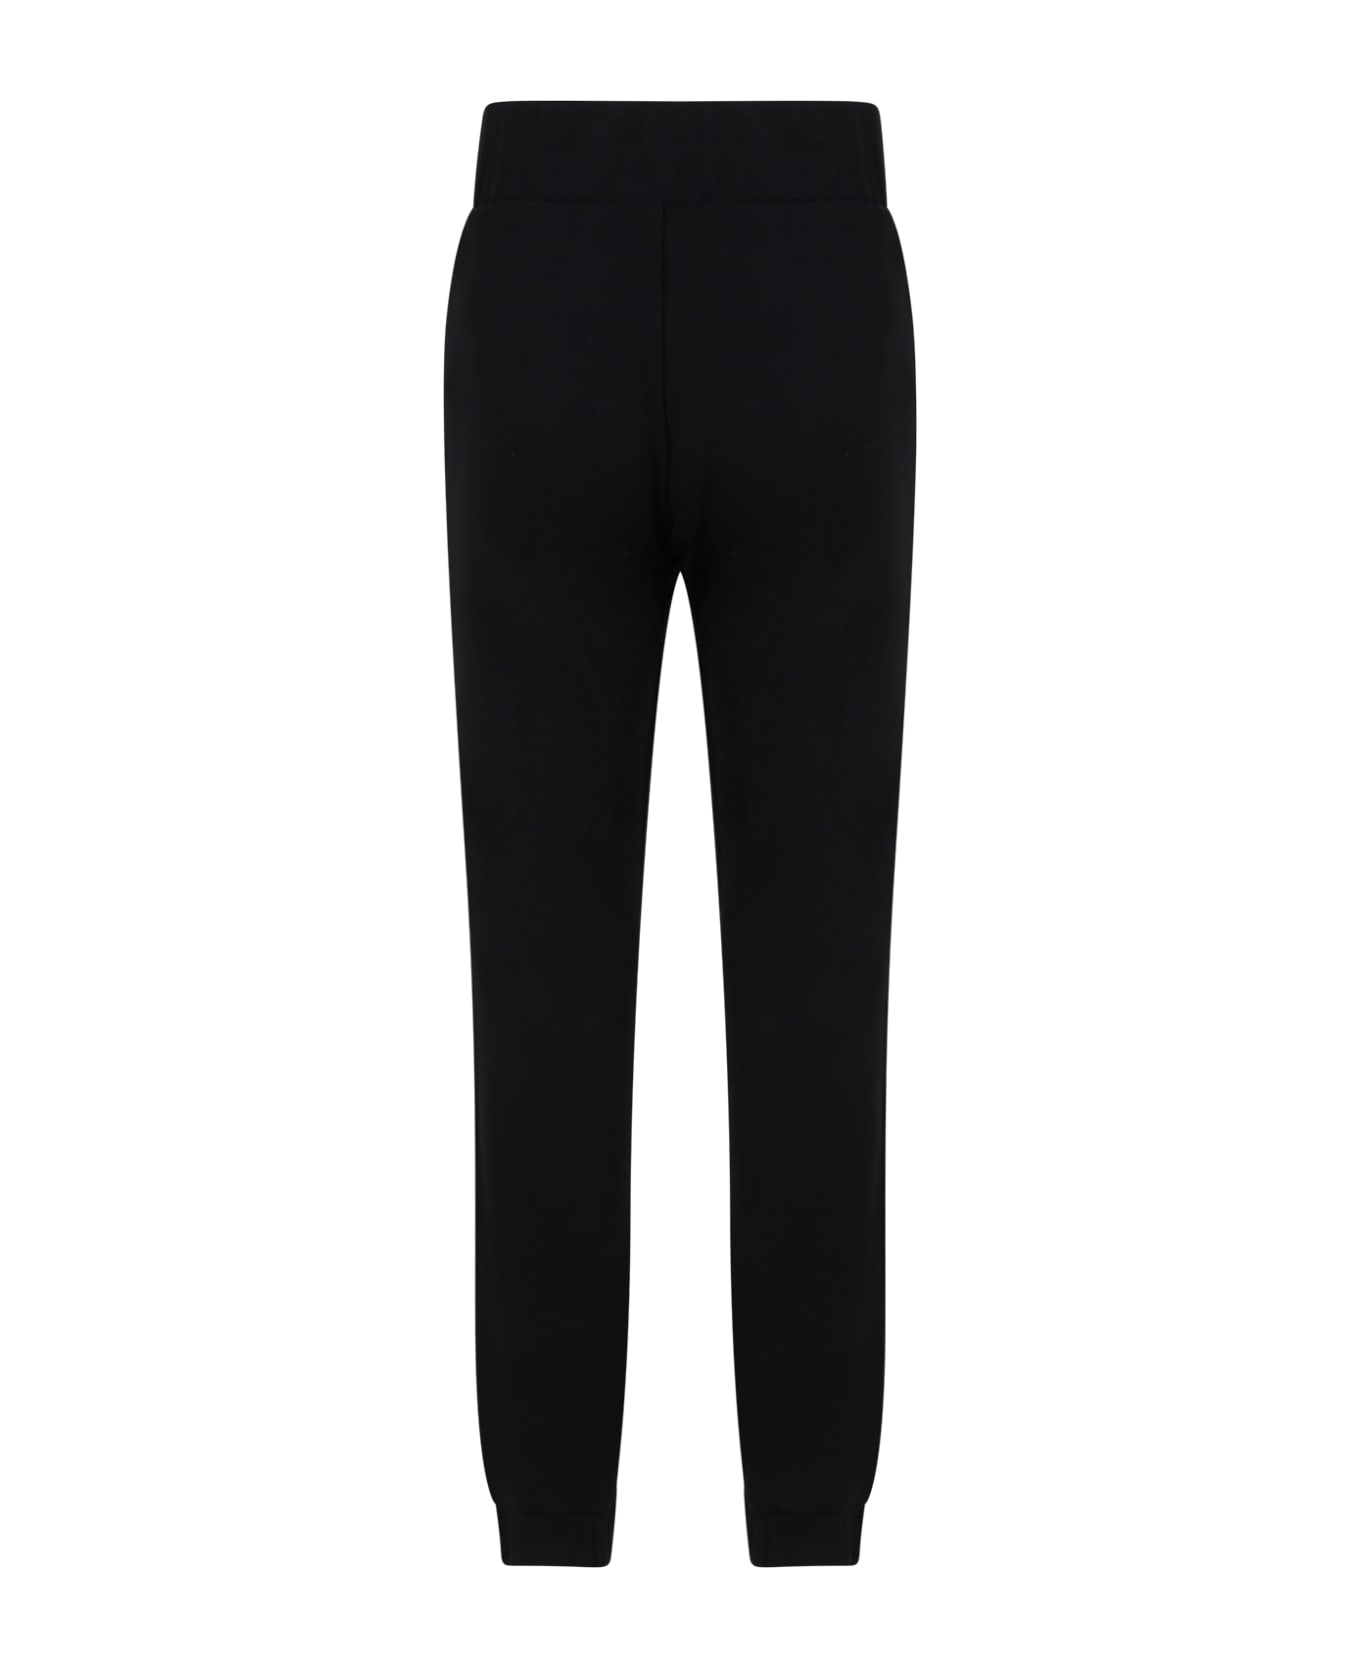 DKNY Black Trousers For Boy With Logo - Black